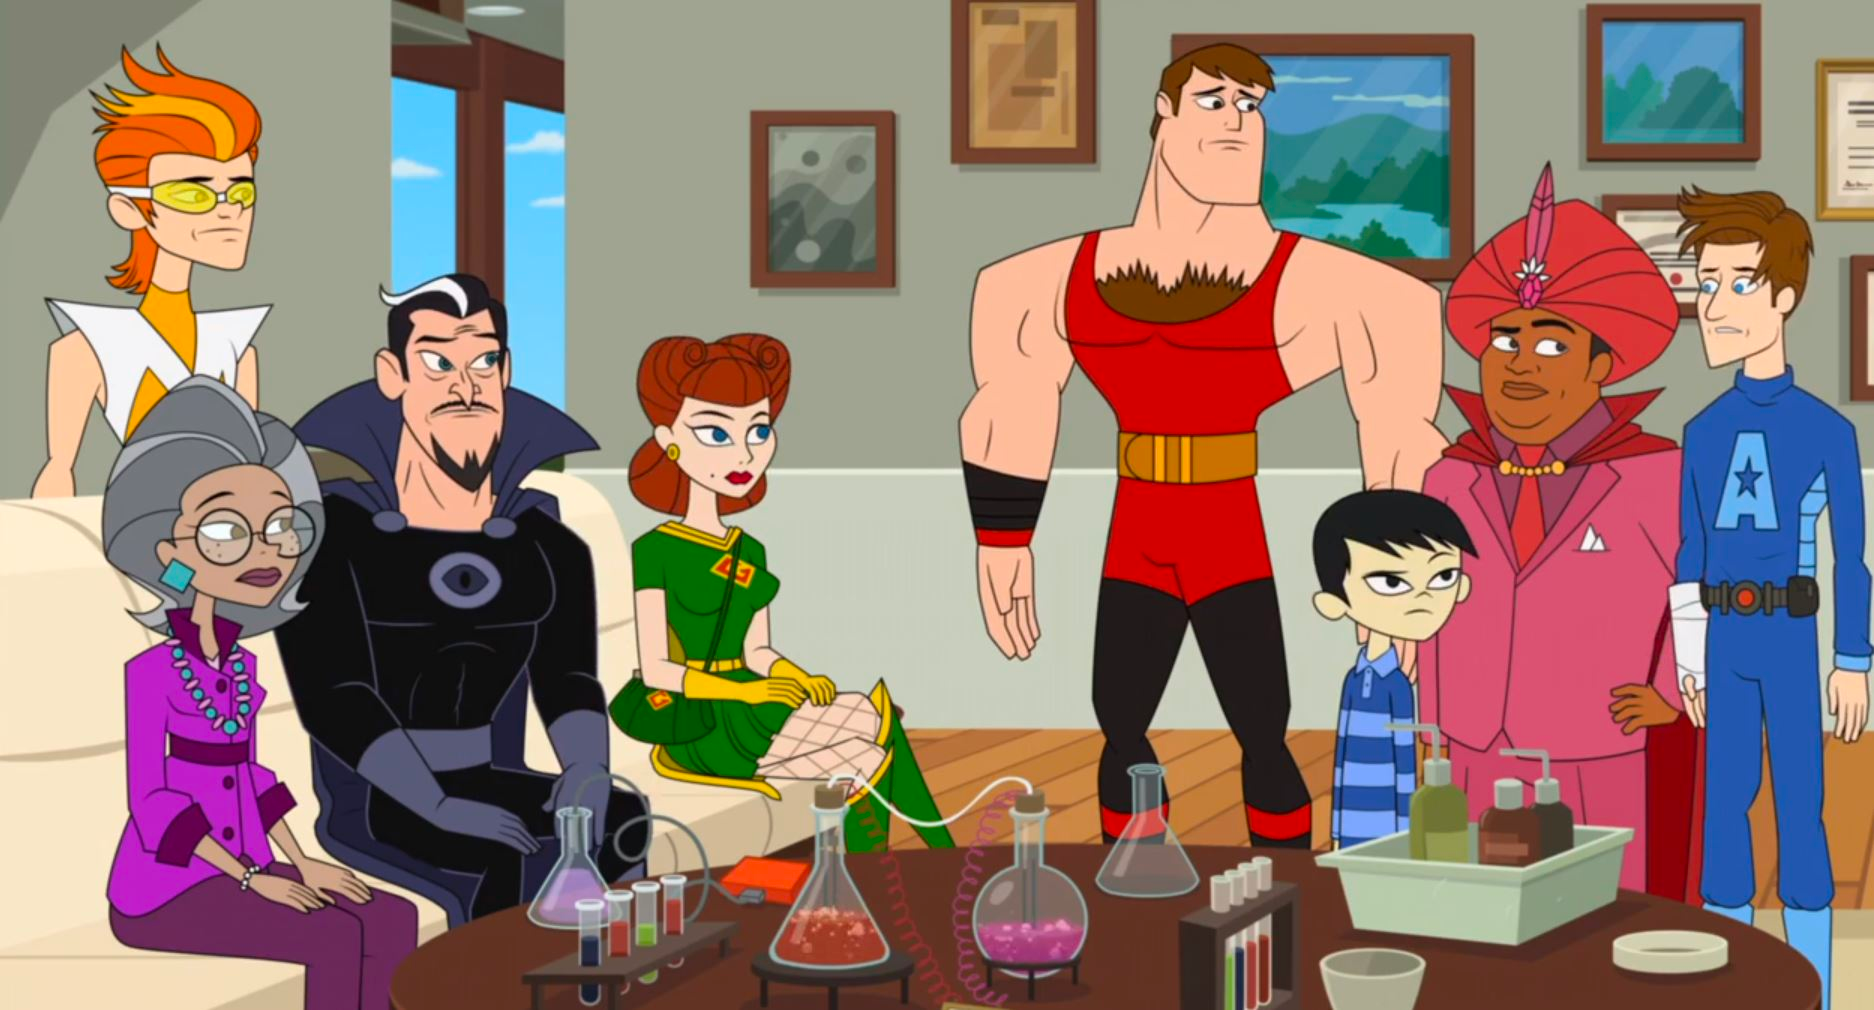 The characters of The Awesomes are sitting in a living room.